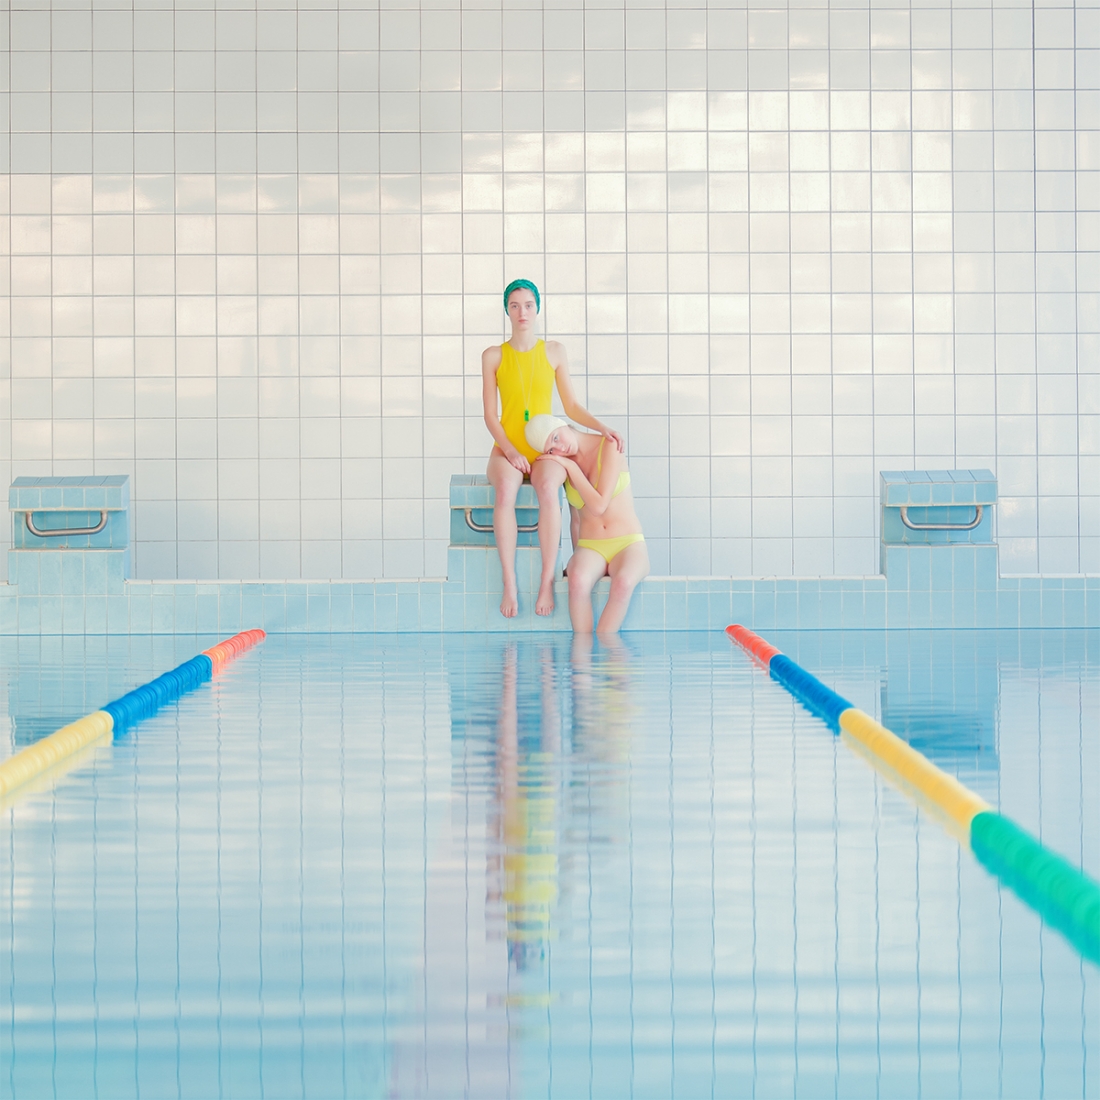 Swimming Pool Maria Svarbova S Photographs Of Primary Coloured